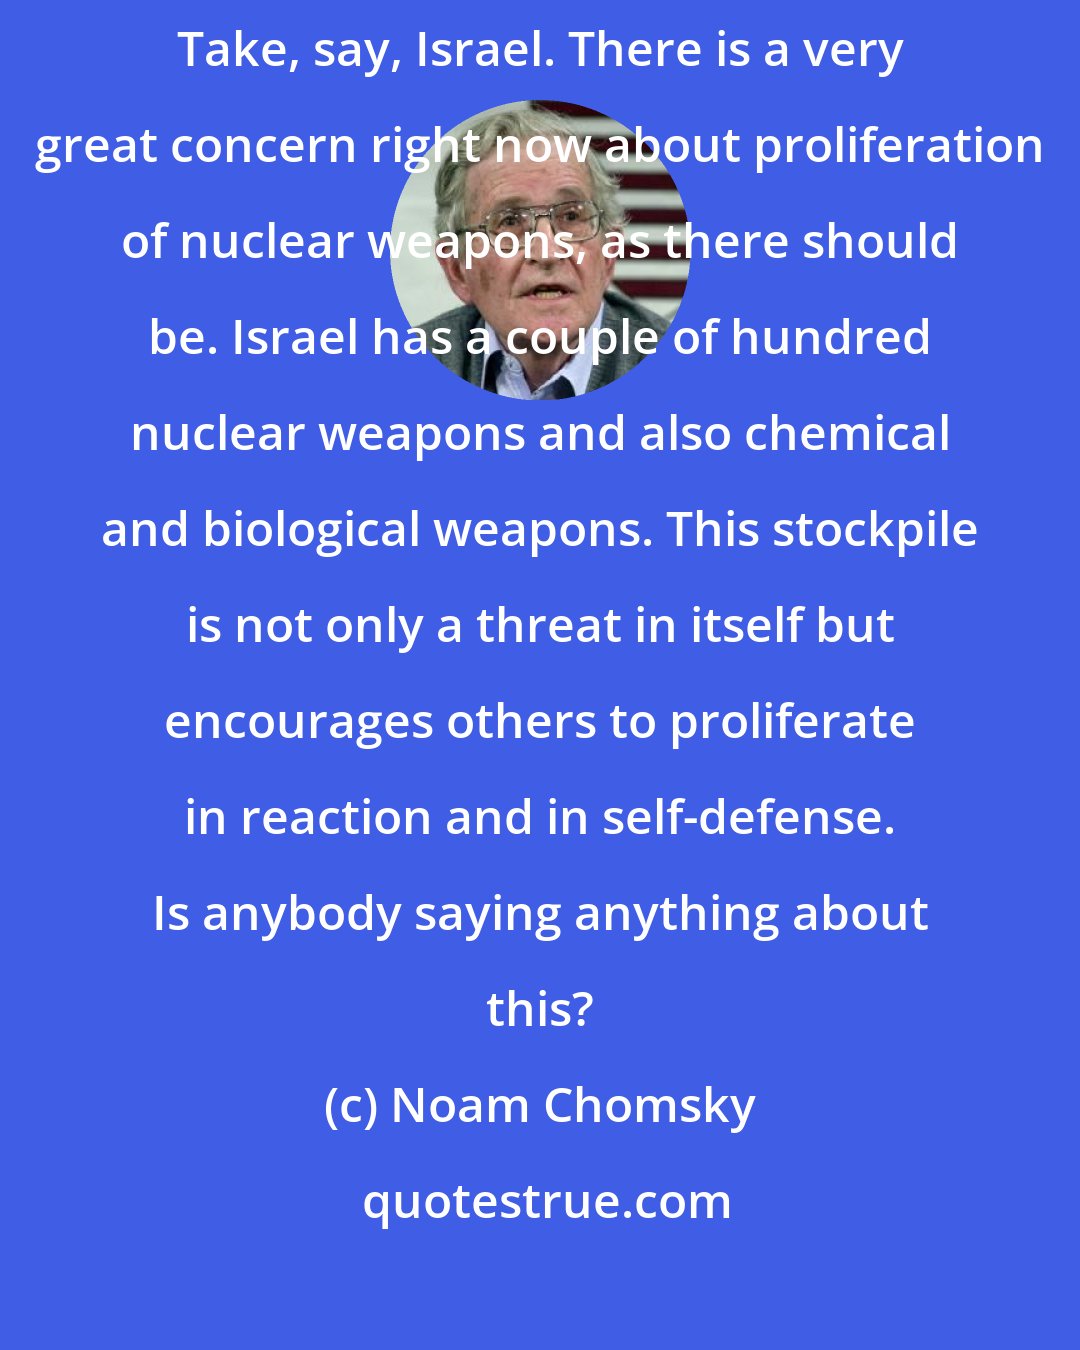 Noam Chomsky: If you want to find weapons of destruction, you can find them all over the place. Take, say, Israel. There is a very great concern right now about proliferation of nuclear weapons, as there should be. Israel has a couple of hundred nuclear weapons and also chemical and biological weapons. This stockpile is not only a threat in itself but encourages others to proliferate in reaction and in self-defense. Is anybody saying anything about this?